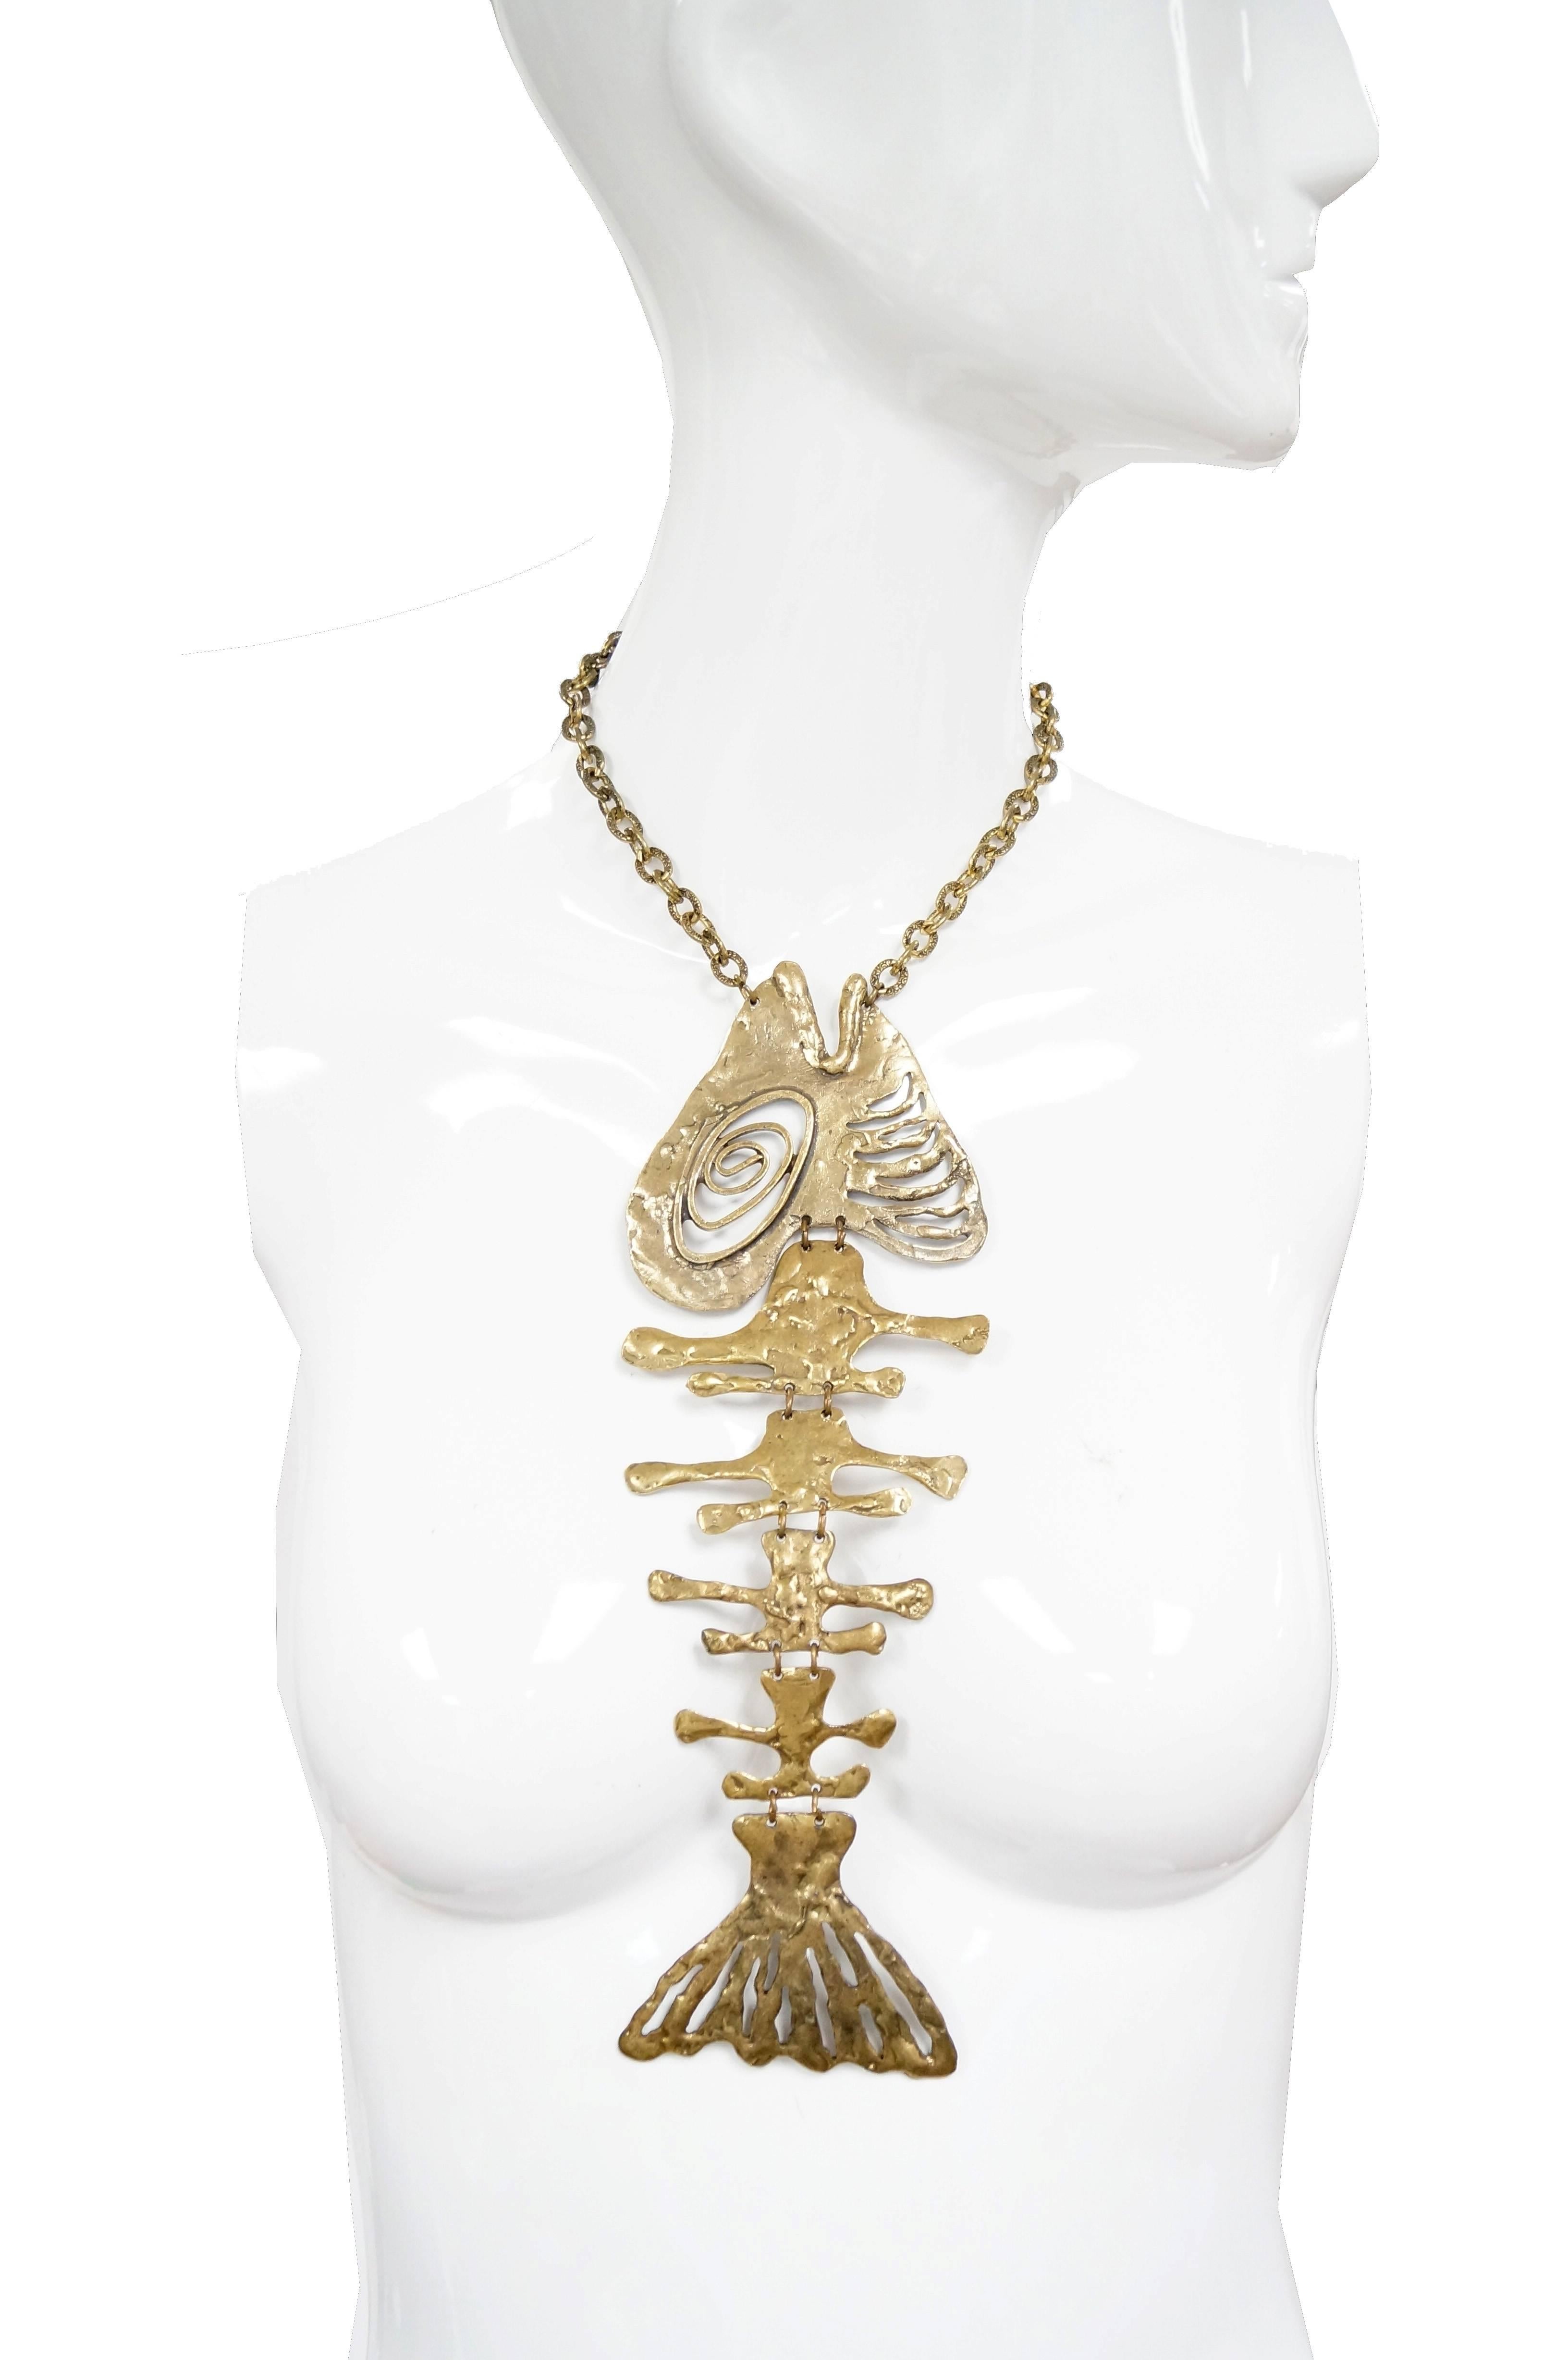 Extremely Rare Louis Giusti semi-articulated fish bone necklace. This unusual mid century statement piece features a detailed tail, gills, and swirling eye. Wonderful brutalist design with unexpected whimsical elements. Fish hangs on a heavy,